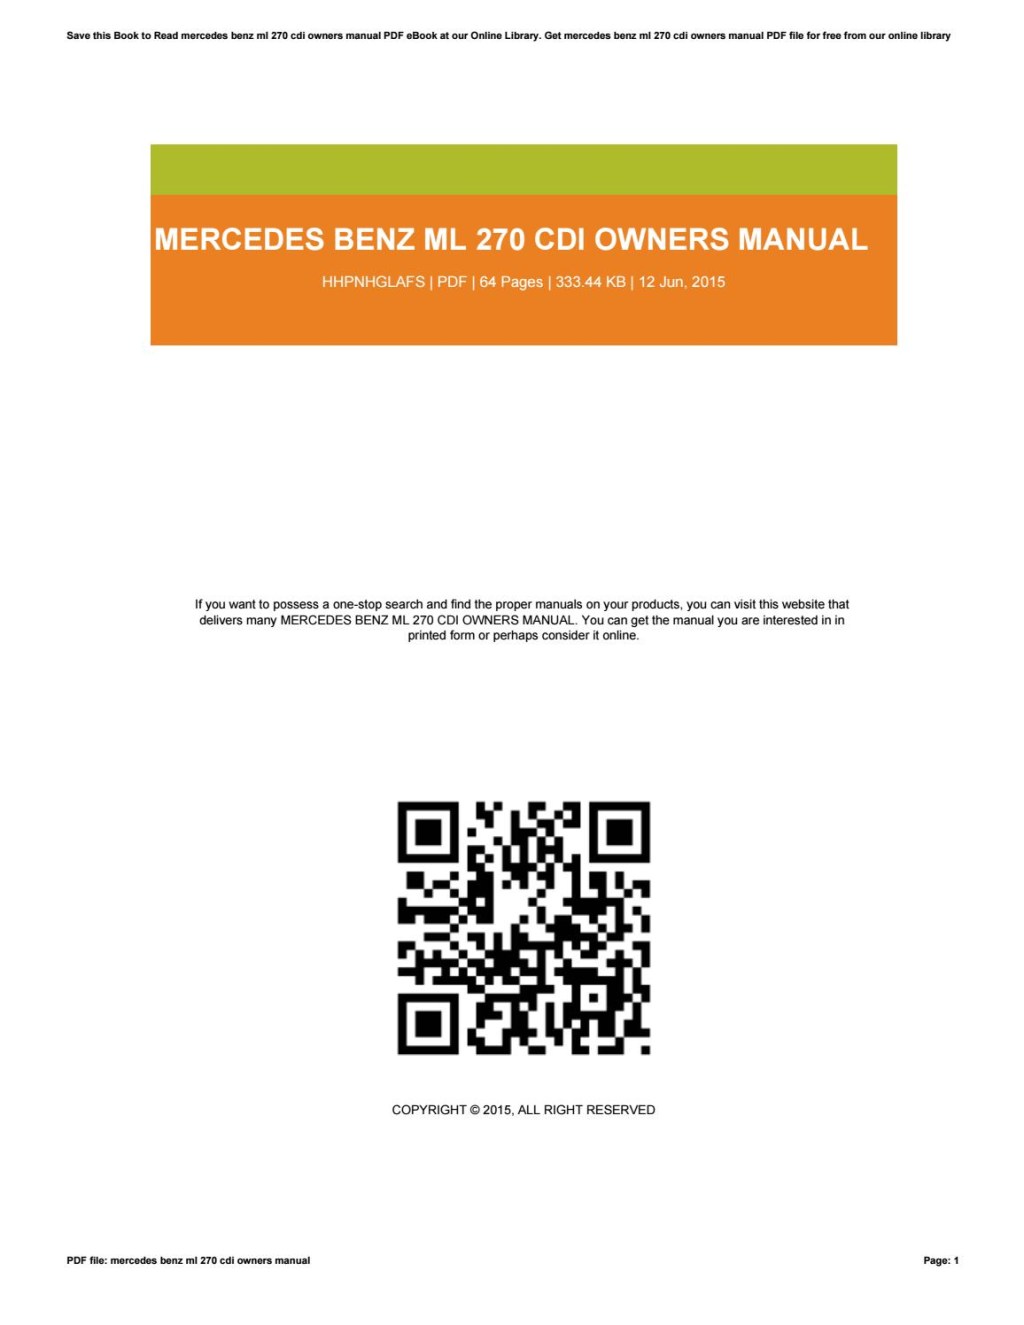 Picture of: Mercedes benz ml  cdi owners manual by u – Issuu